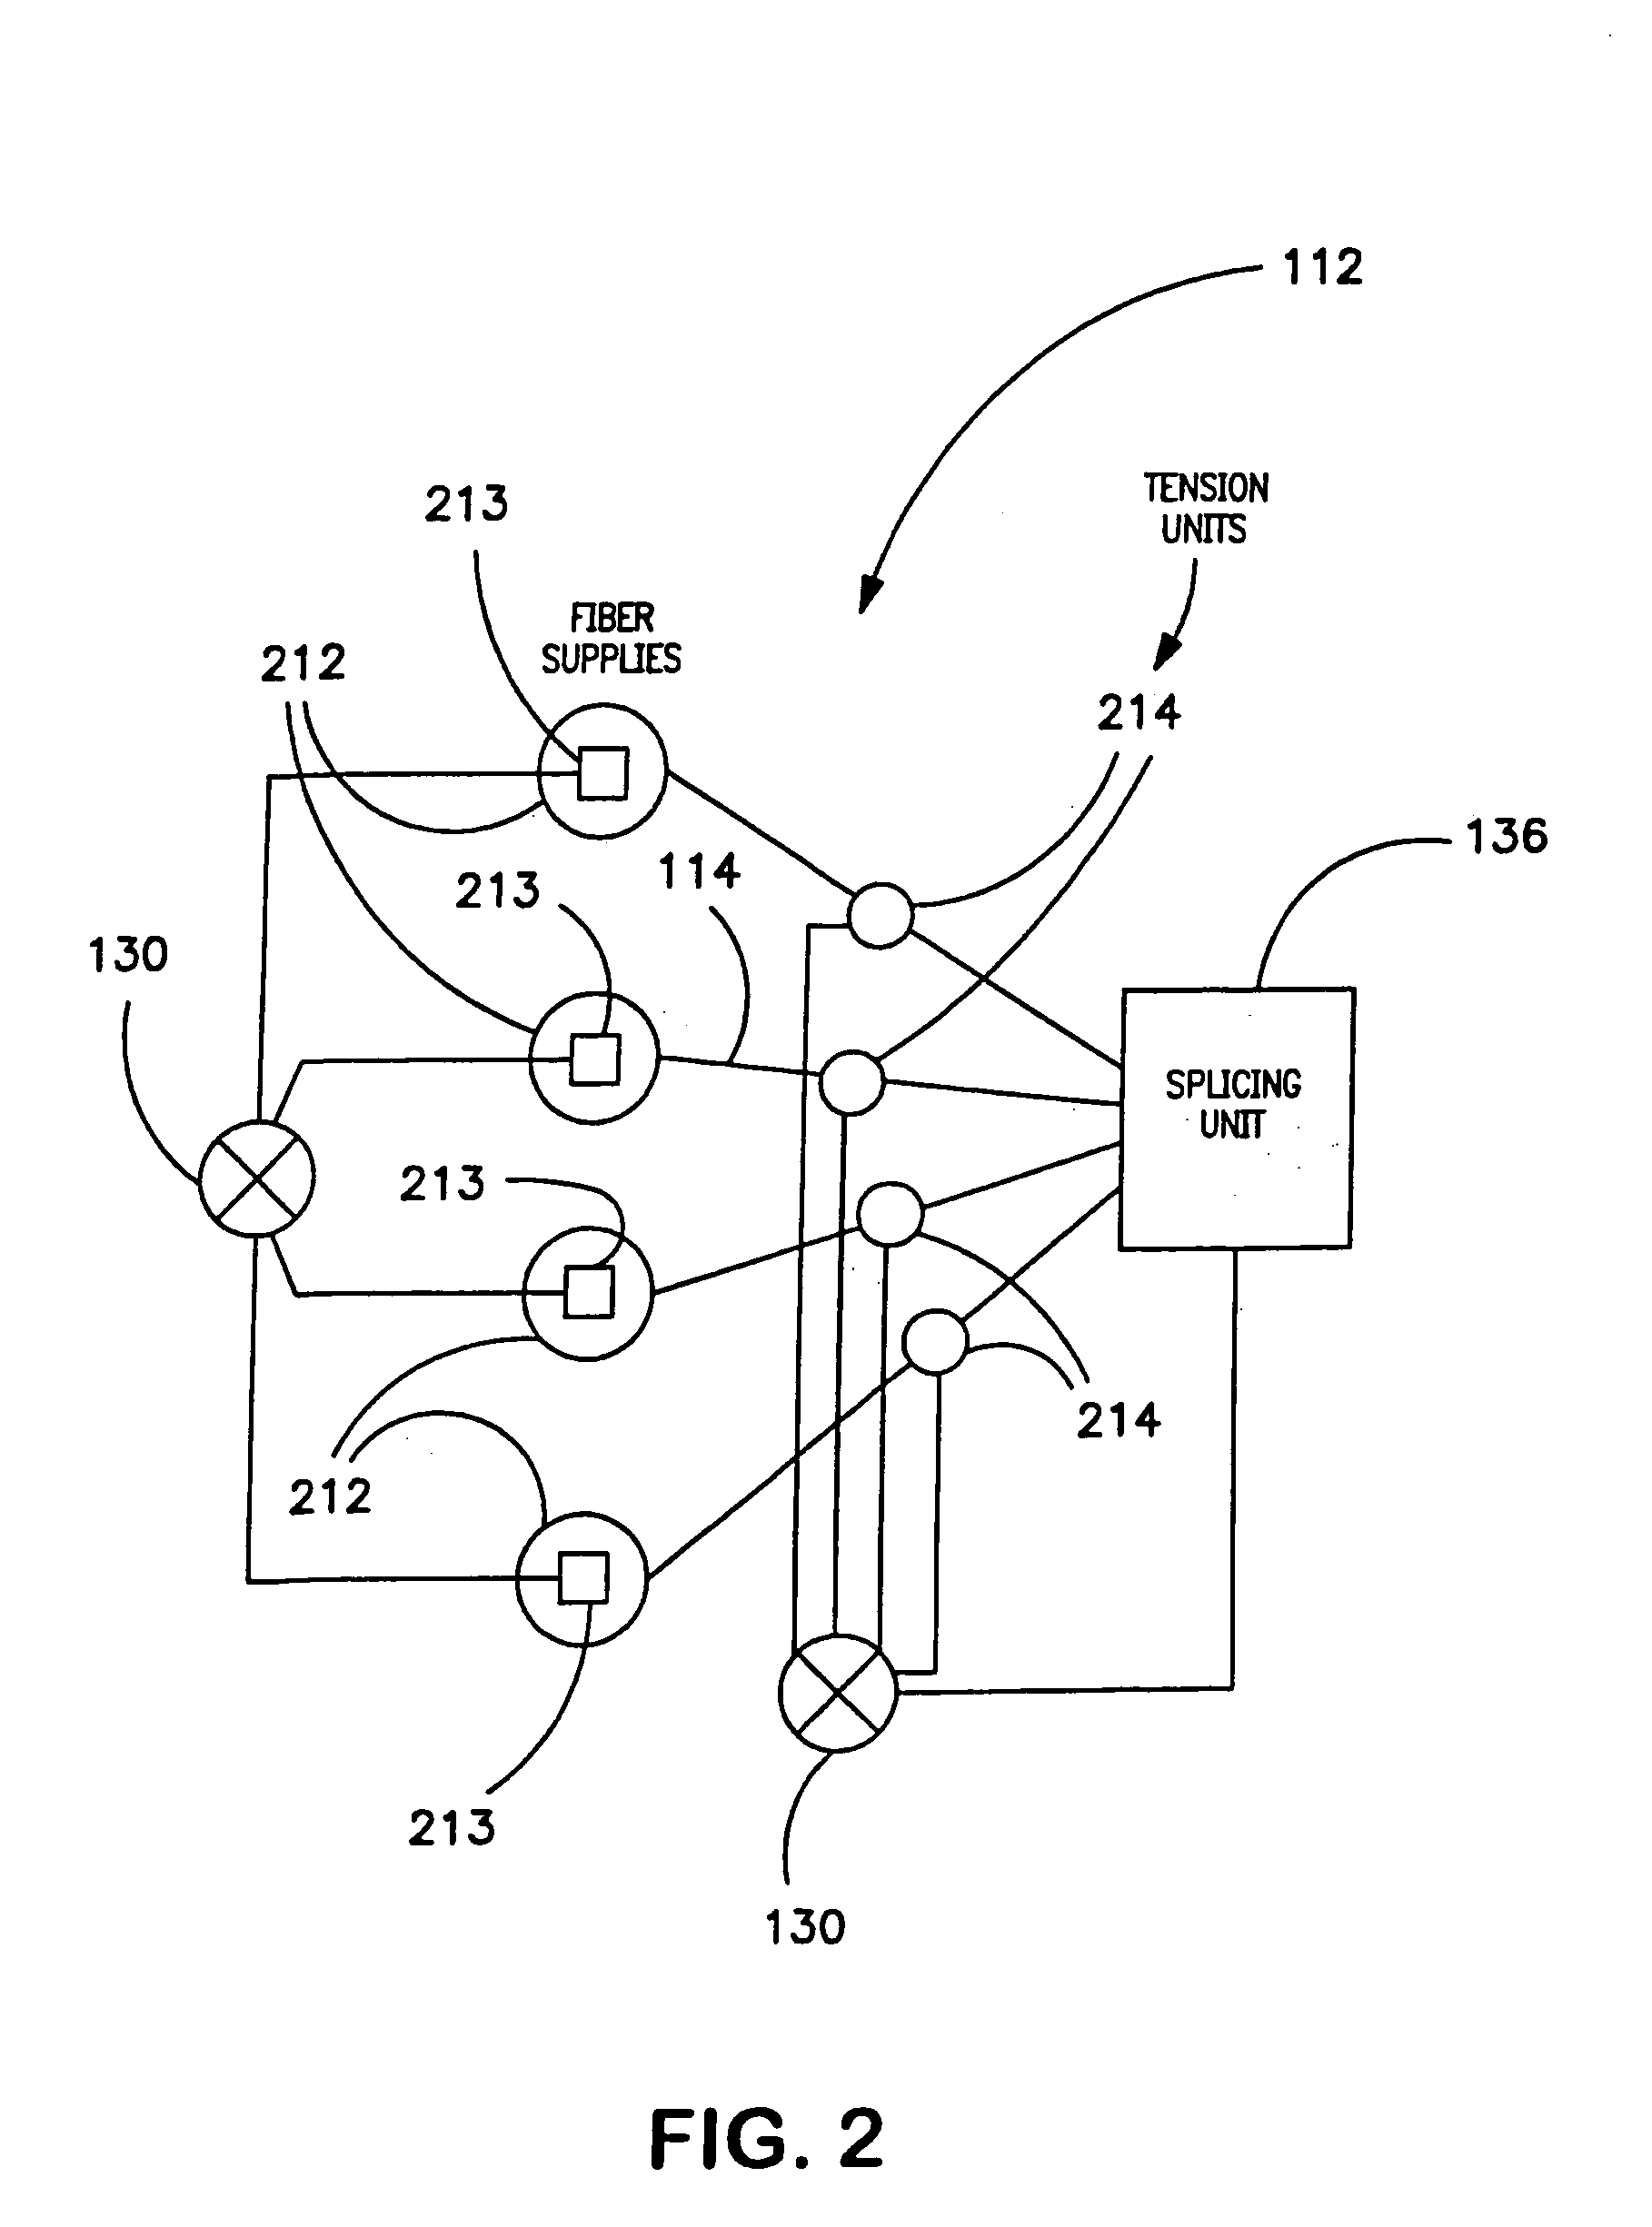 Apparatus and method for manufacture and use of composite fiber components